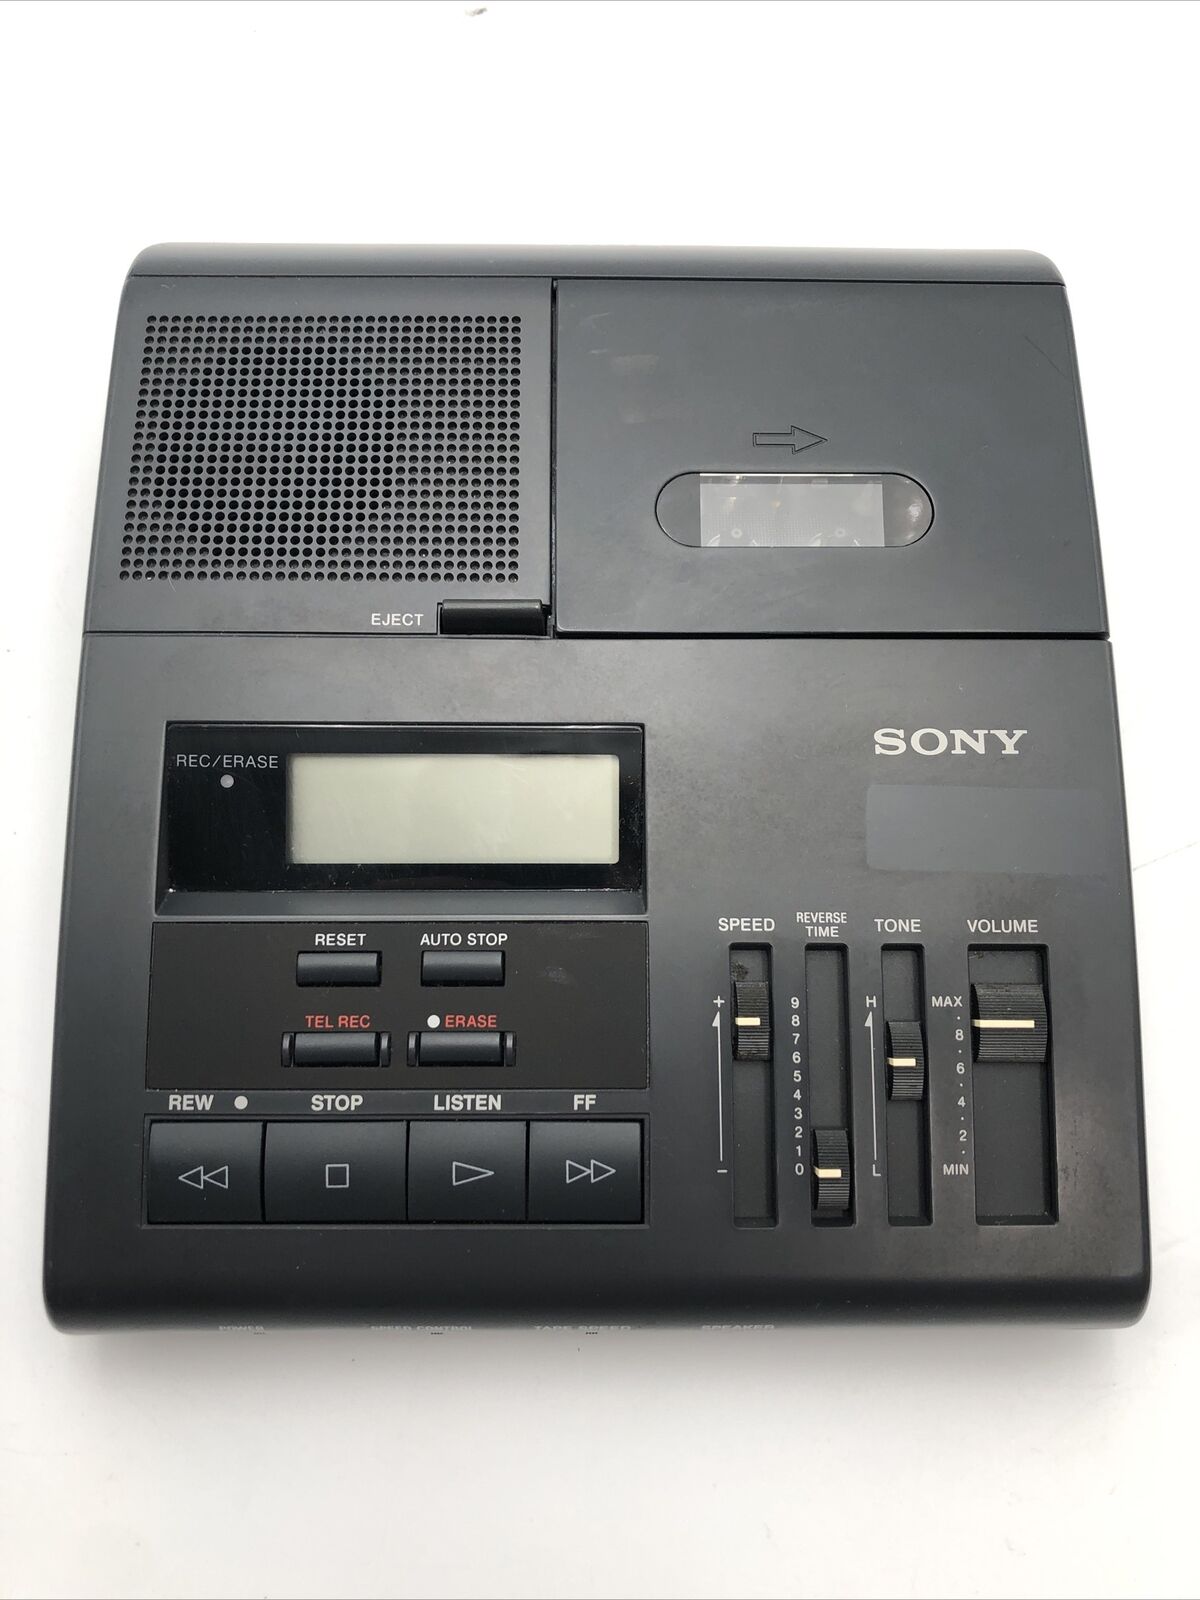 Sony BM-850 Microcassette Transcriber PARTS REPAIR ONLY READ